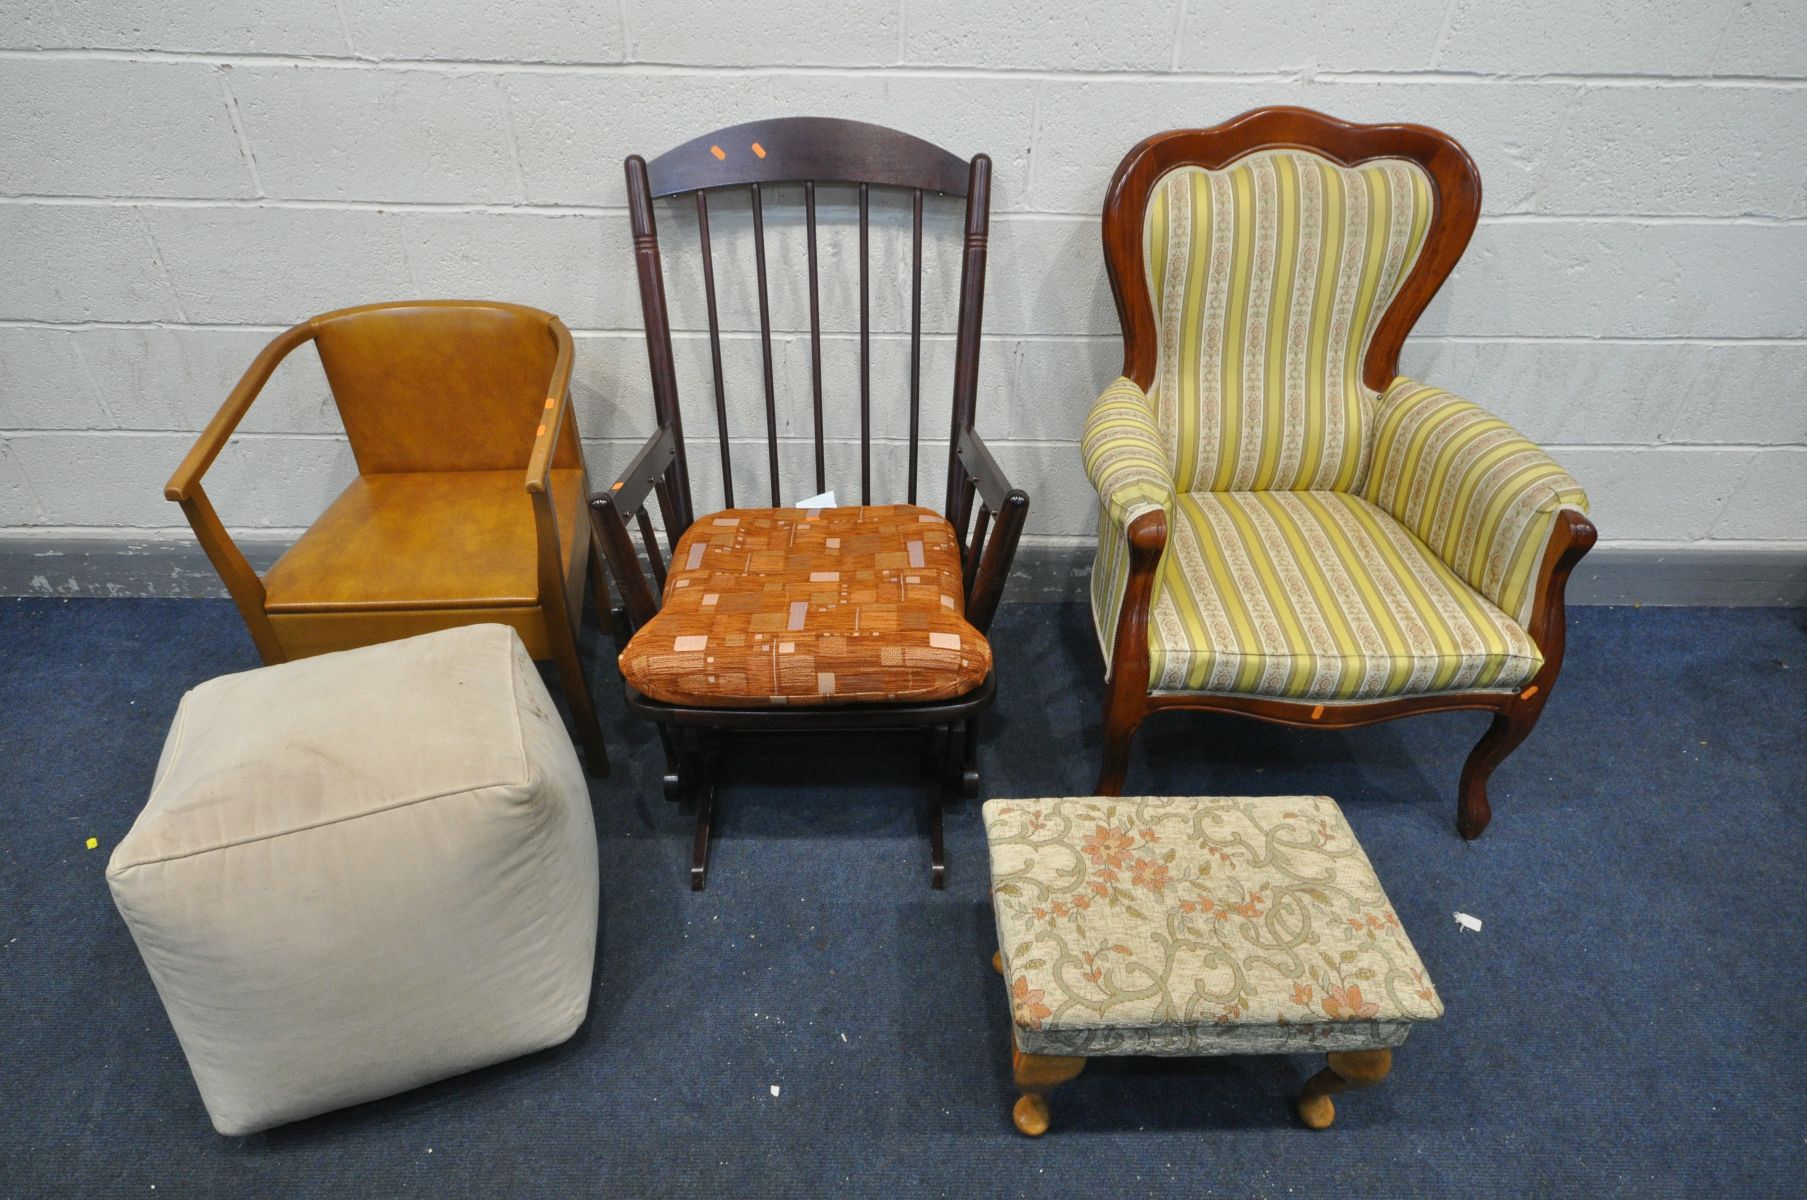 A LATE 20TH CENTURY ITALIAN MAHOGANY SPOONBACK CHAIR, along with a modern rocking chair (missing one